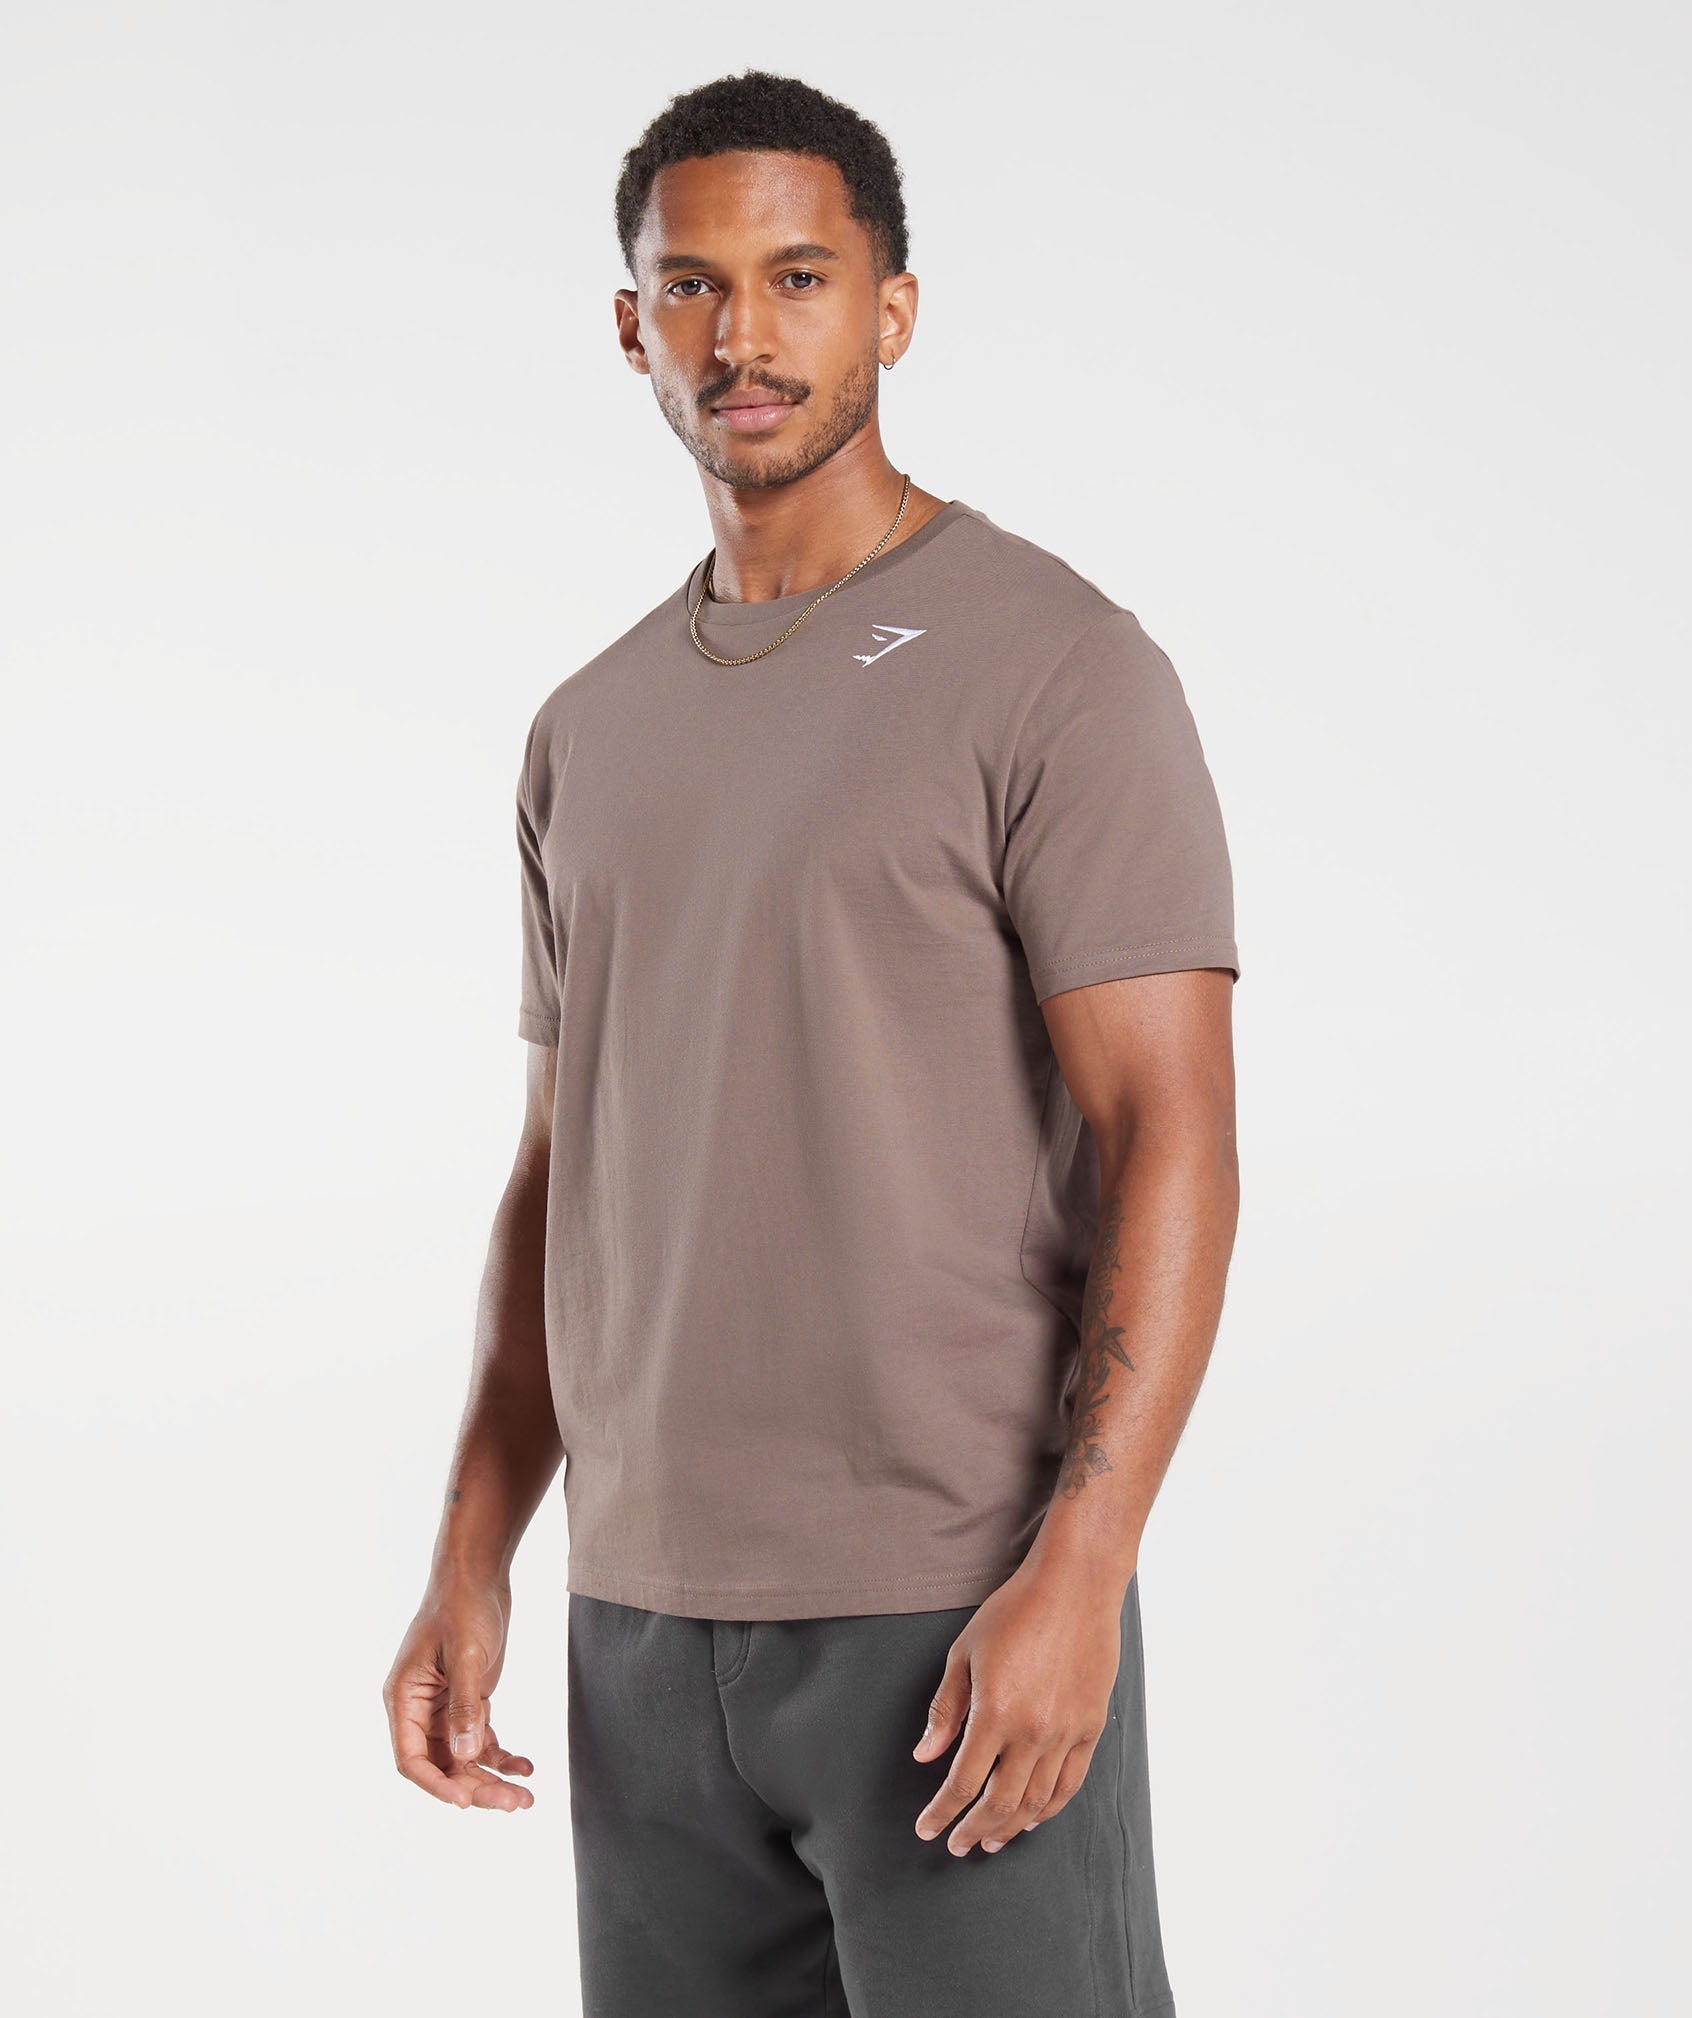 Crest T-Shirt in Truffle Brown